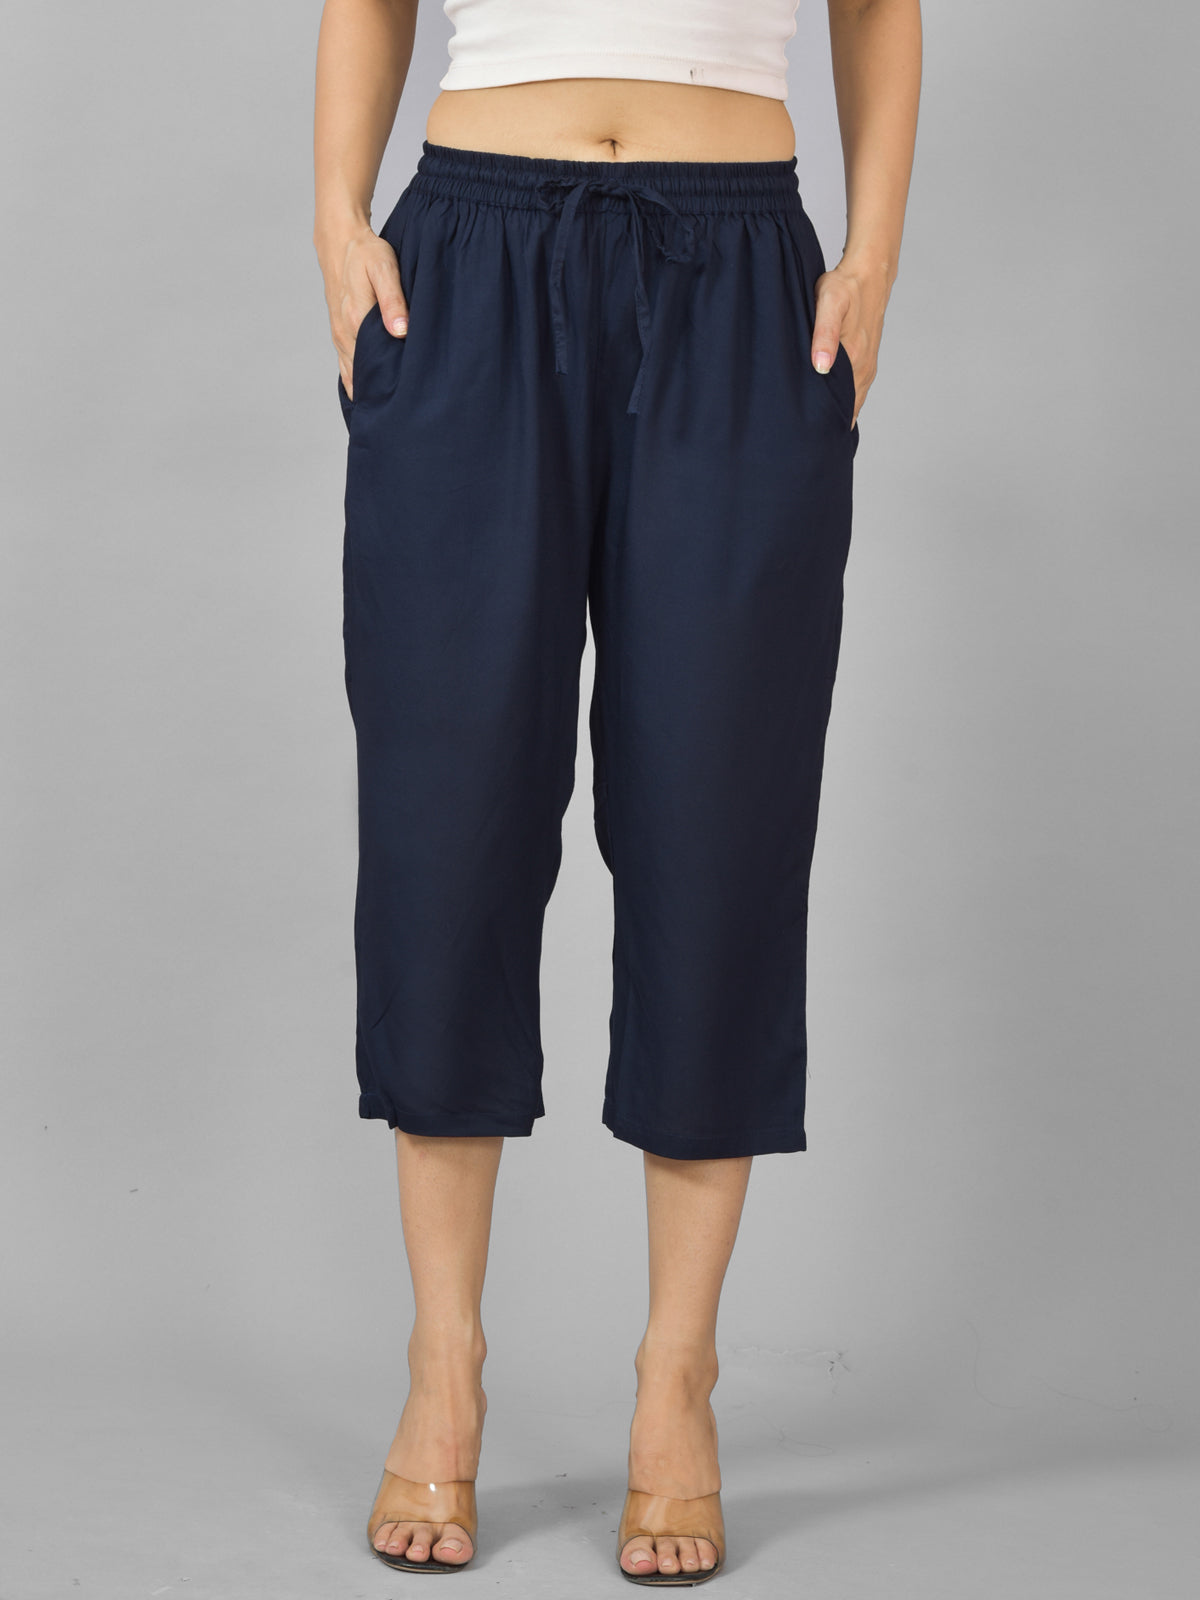 Pack Of 2 Womens Navy Blue And White Calf Length Rayon Culottes Trouser Combo